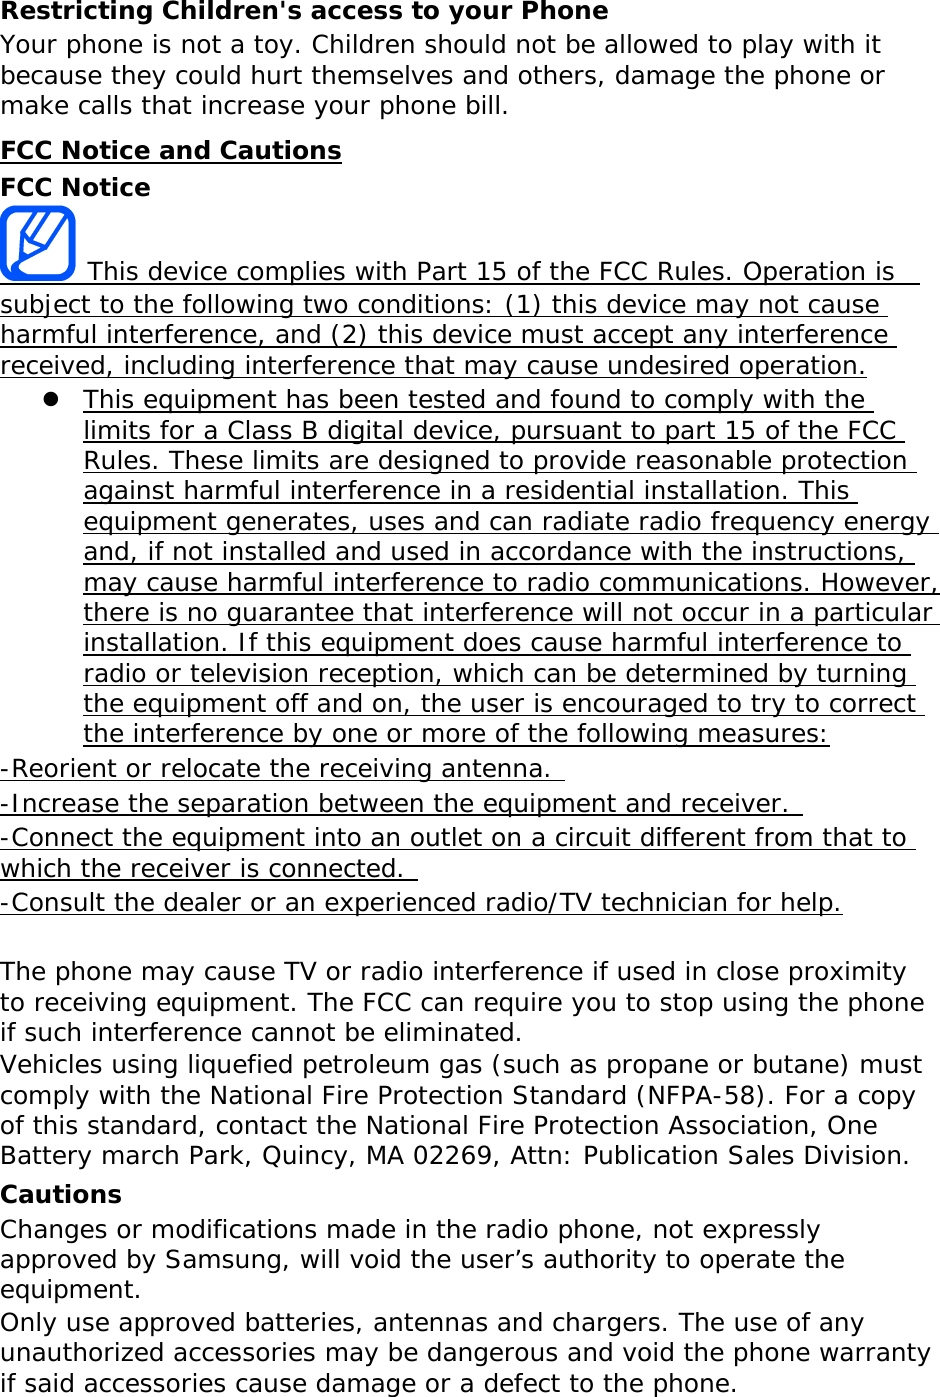 Restricting Children&apos;s access to your Phone Your phone is not a toy. Children should not be allowed to play with it because they could hurt themselves and others, damage the phone or make calls that increase your phone bill. FCC Notice and Cautions FCC Notice  This device complies with Part 15 of the FCC Rules. Operation is  subject to the following two conditions: (1) this device may not cause harmful interference, and (2) this device must accept any interference received, including interference that may cause undesired operation. z This equipment has been tested and found to comply with the limits for a Class B digital device, pursuant to part 15 of the FCC Rules. These limits are designed to provide reasonable protection against harmful interference in a residential installation. This equipment generates, uses and can radiate radio frequency energy and, if not installed and used in accordance with the instructions, may cause harmful interference to radio communications. However, there is no guarantee that interference will not occur in a particular installation. If this equipment does cause harmful interference to radio or television reception, which can be determined by turning the equipment off and on, the user is encouraged to try to correct the interference by one or more of the following measures: -Reorient or relocate the receiving antenna.  -Increase the separation between the equipment and receiver.  -Connect the equipment into an outlet on a circuit different from that to which the receiver is connected.  -Consult the dealer or an experienced radio/TV technician for help.  The phone may cause TV or radio interference if used in close proximity to receiving equipment. The FCC can require you to stop using the phone if such interference cannot be eliminated. Vehicles using liquefied petroleum gas (such as propane or butane) must comply with the National Fire Protection Standard (NFPA-58). For a copy of this standard, contact the National Fire Protection Association, One Battery march Park, Quincy, MA 02269, Attn: Publication Sales Division. Cautions Changes or modifications made in the radio phone, not expressly approved by Samsung, will void the user’s authority to operate the equipment. Only use approved batteries, antennas and chargers. The use of any unauthorized accessories may be dangerous and void the phone warranty if said accessories cause damage or a defect to the phone. 